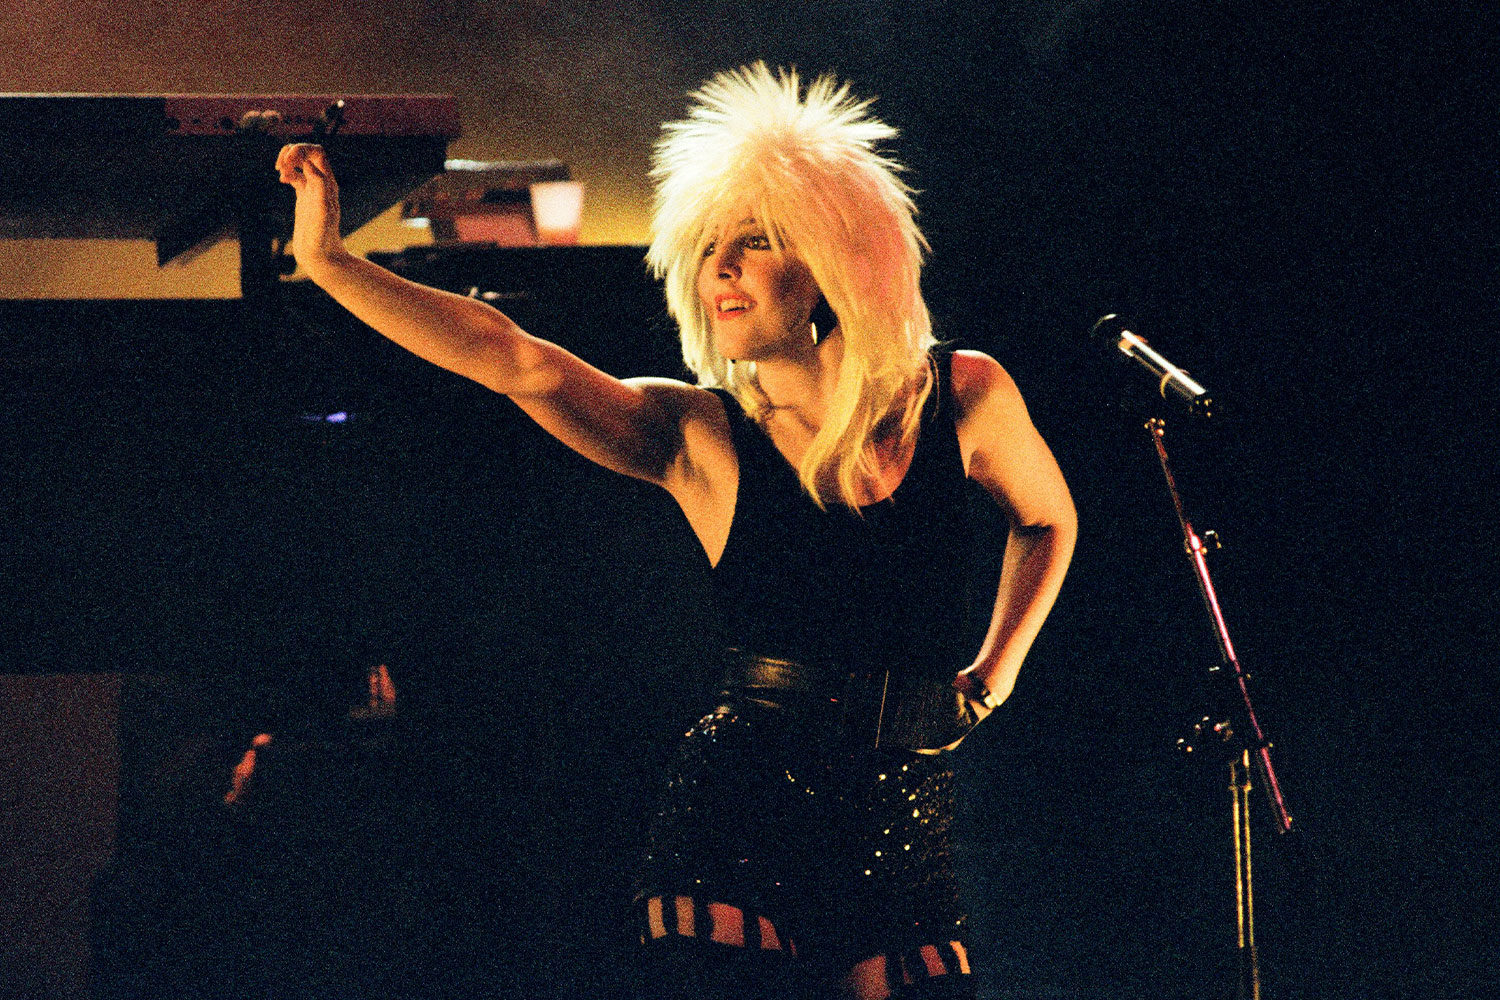 Woman performing in an 80s style blonde wig circa 1987